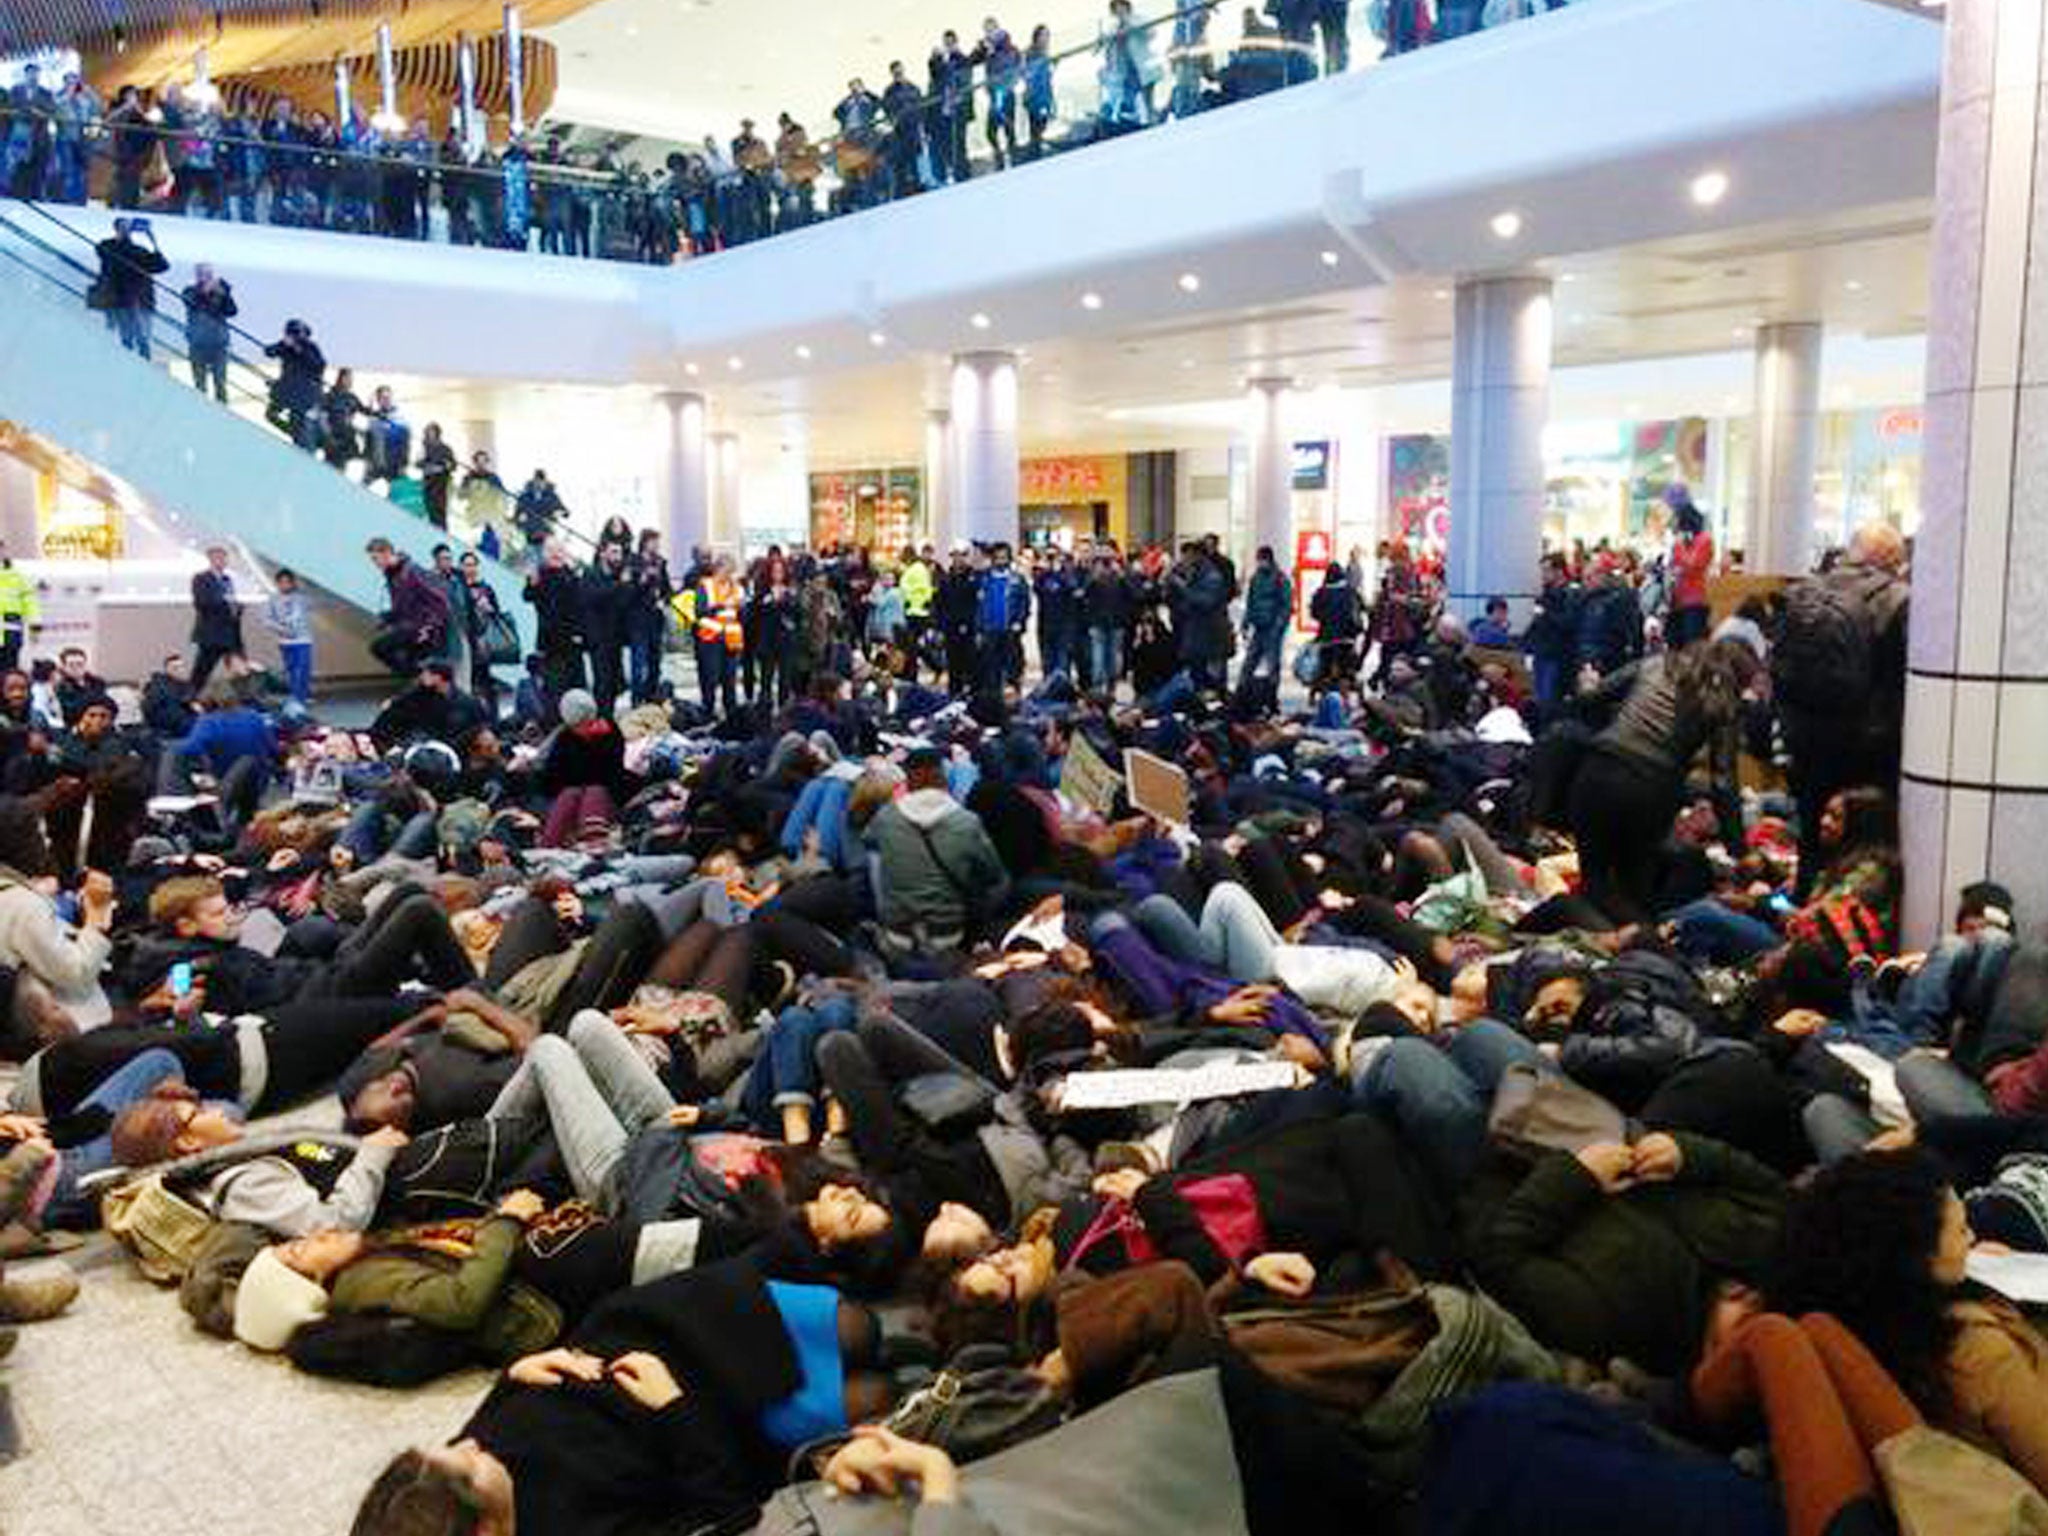 Handout photo courtesy of Areeb Ullah of protesters at Westfield Shopping Centre at Shepherds Bush as they hold a "die-in" in memory of Eric Garner